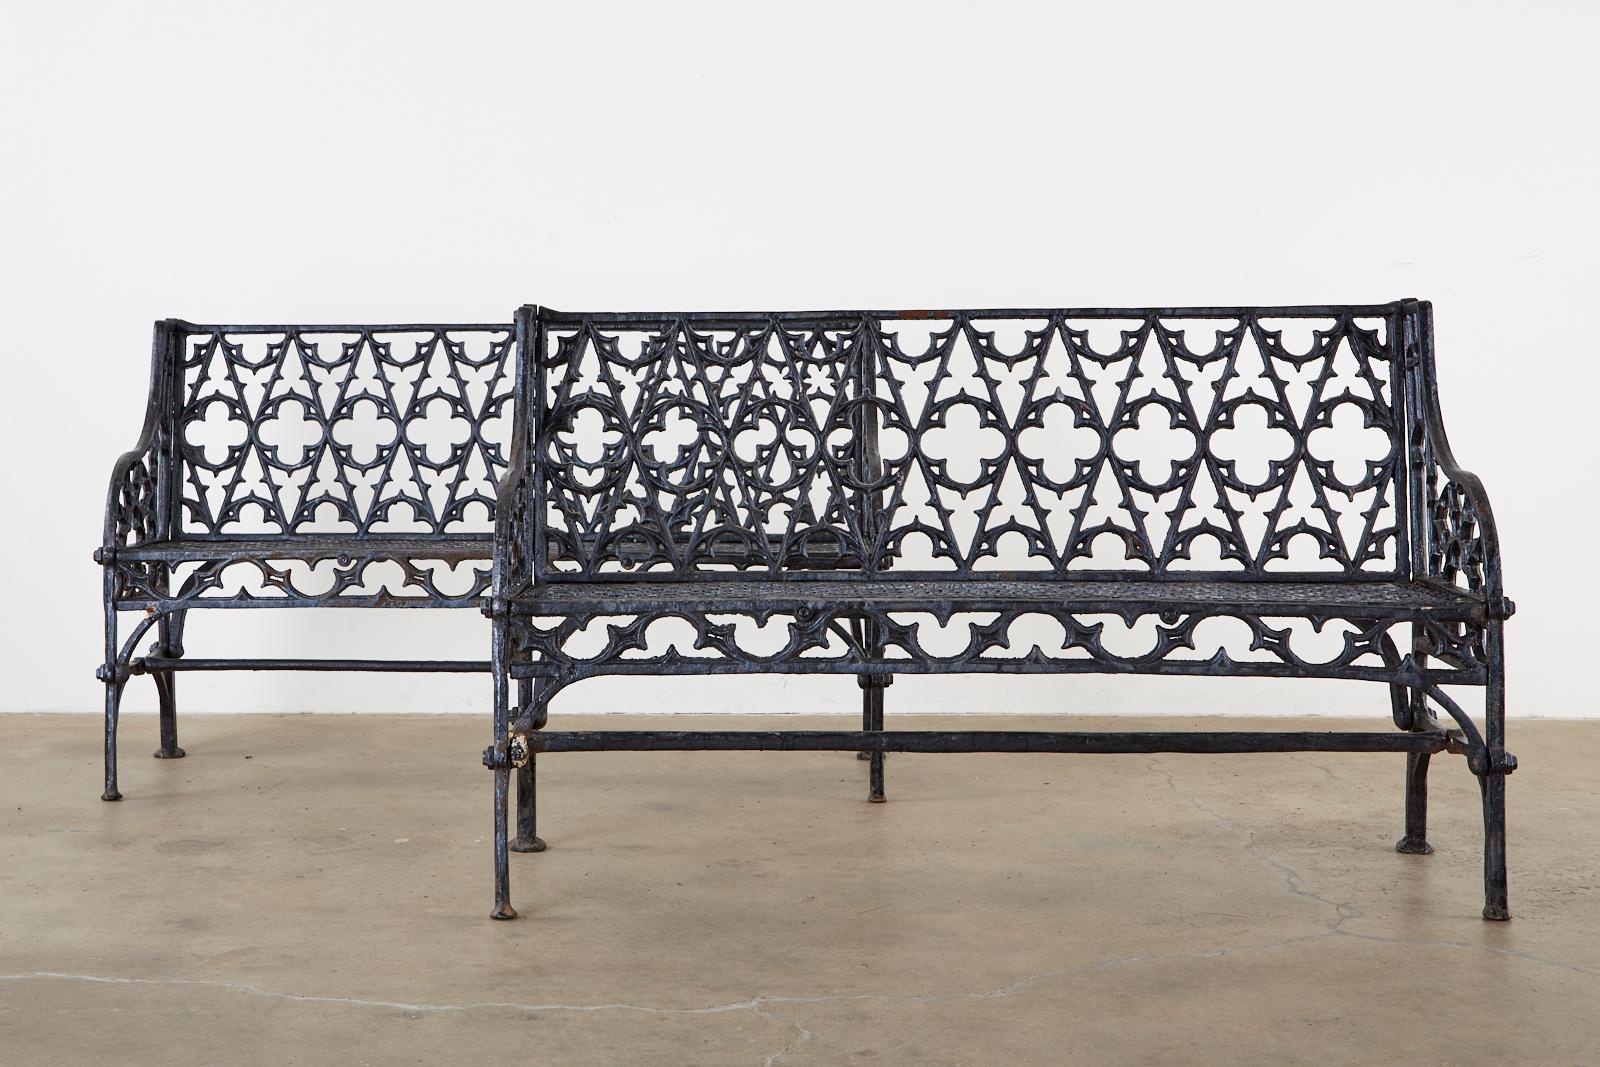 English Coalbrookdale foundry attributed cast iron garden benches. Made in the Gothic Revival English taste featuring Gothic tracery backrest centered by quatrefoil designs. The gracefully curved arms enclosing demilune motif patterns. The seat has